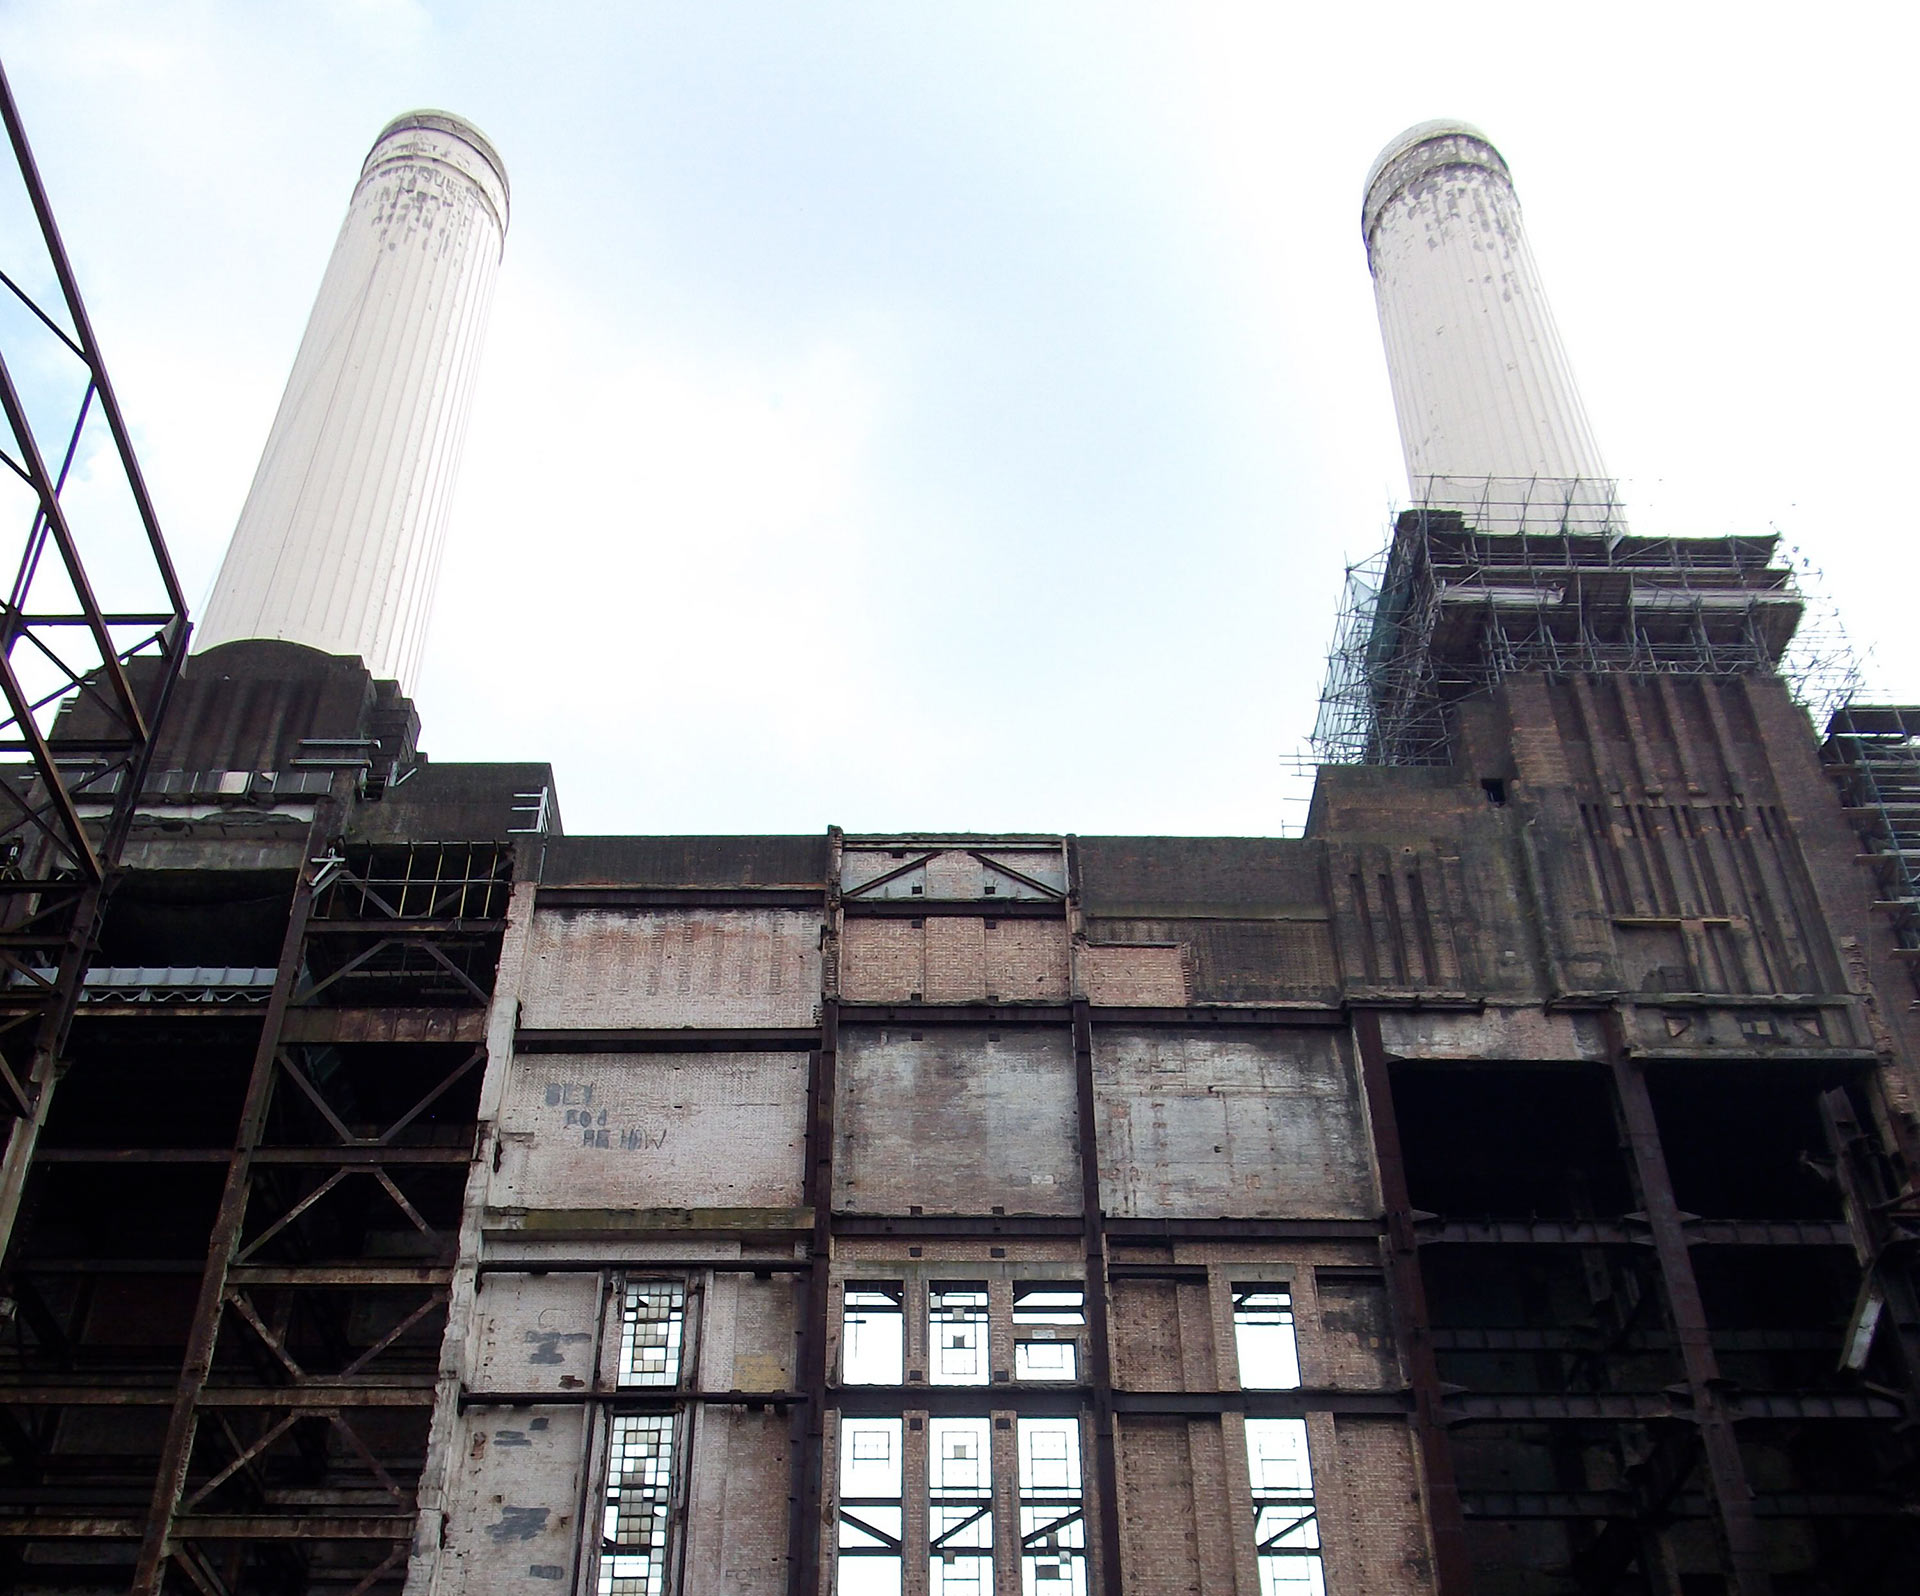 One of the last events to be held at Battersea Power Station before its redevelopment.